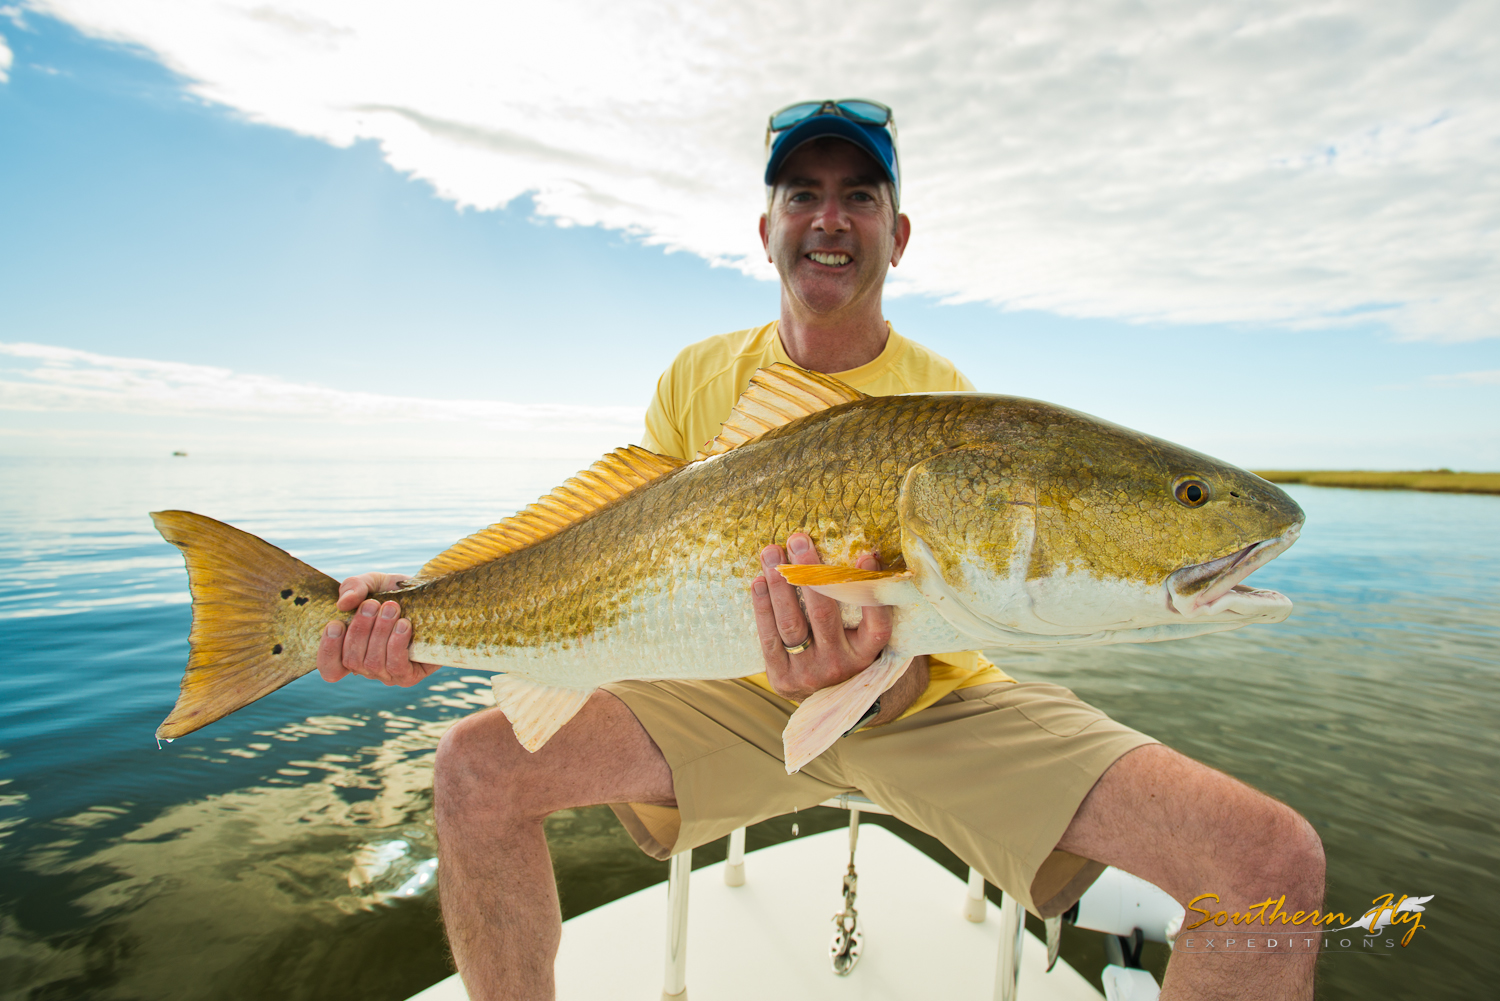 fishing charters - stuff to do while in new orleans Southern Fly Expeditions 